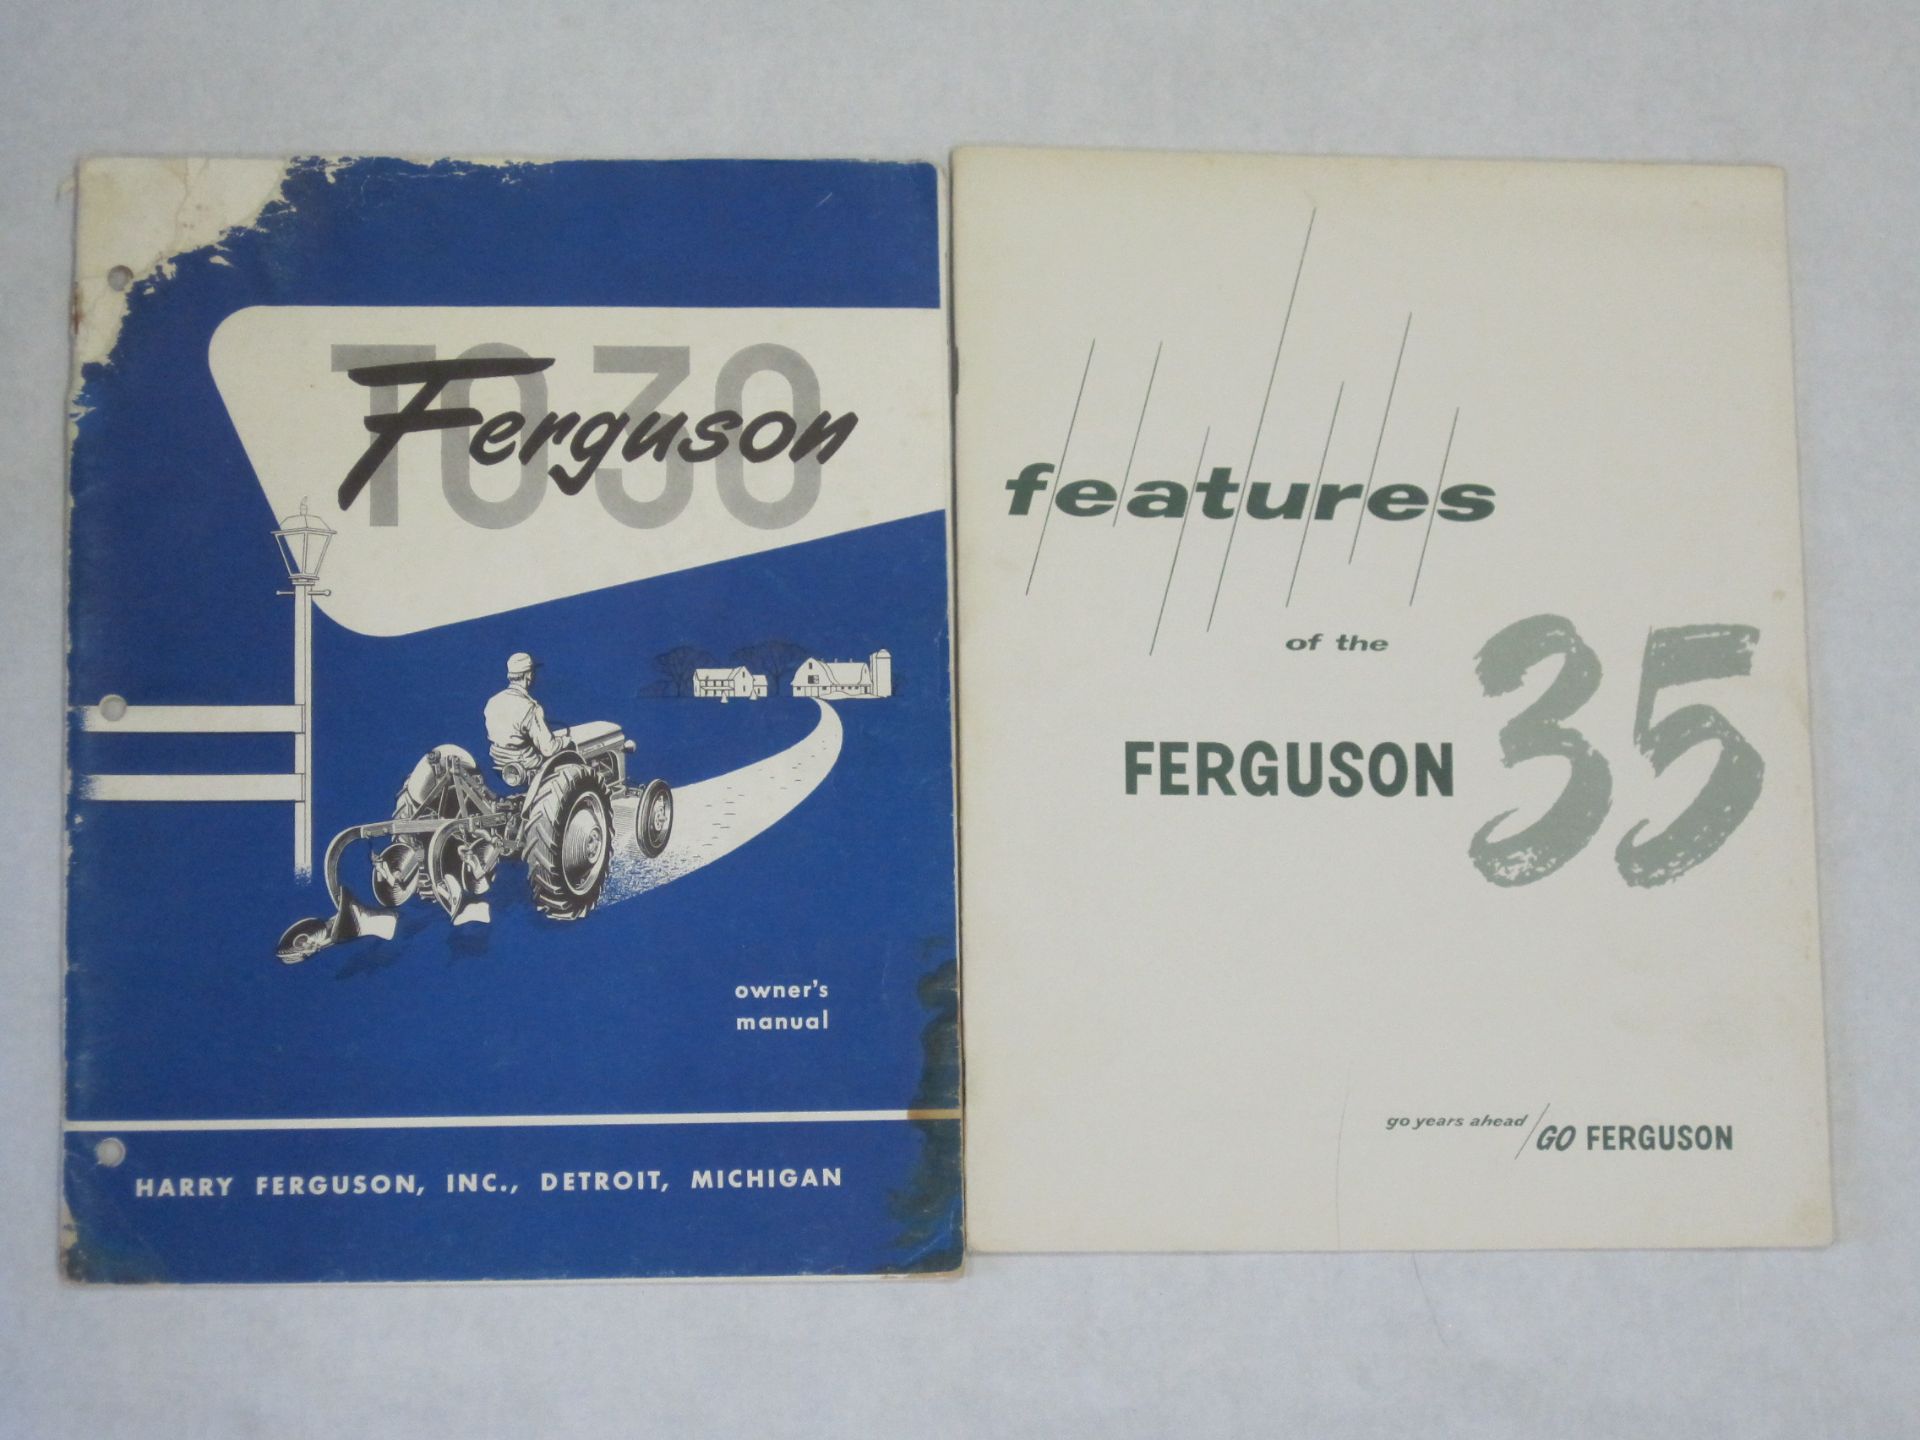 Ferguson TO-30 40pp Owners Manual t/w Features Of The Ferguson a 23pp illustrated brochure